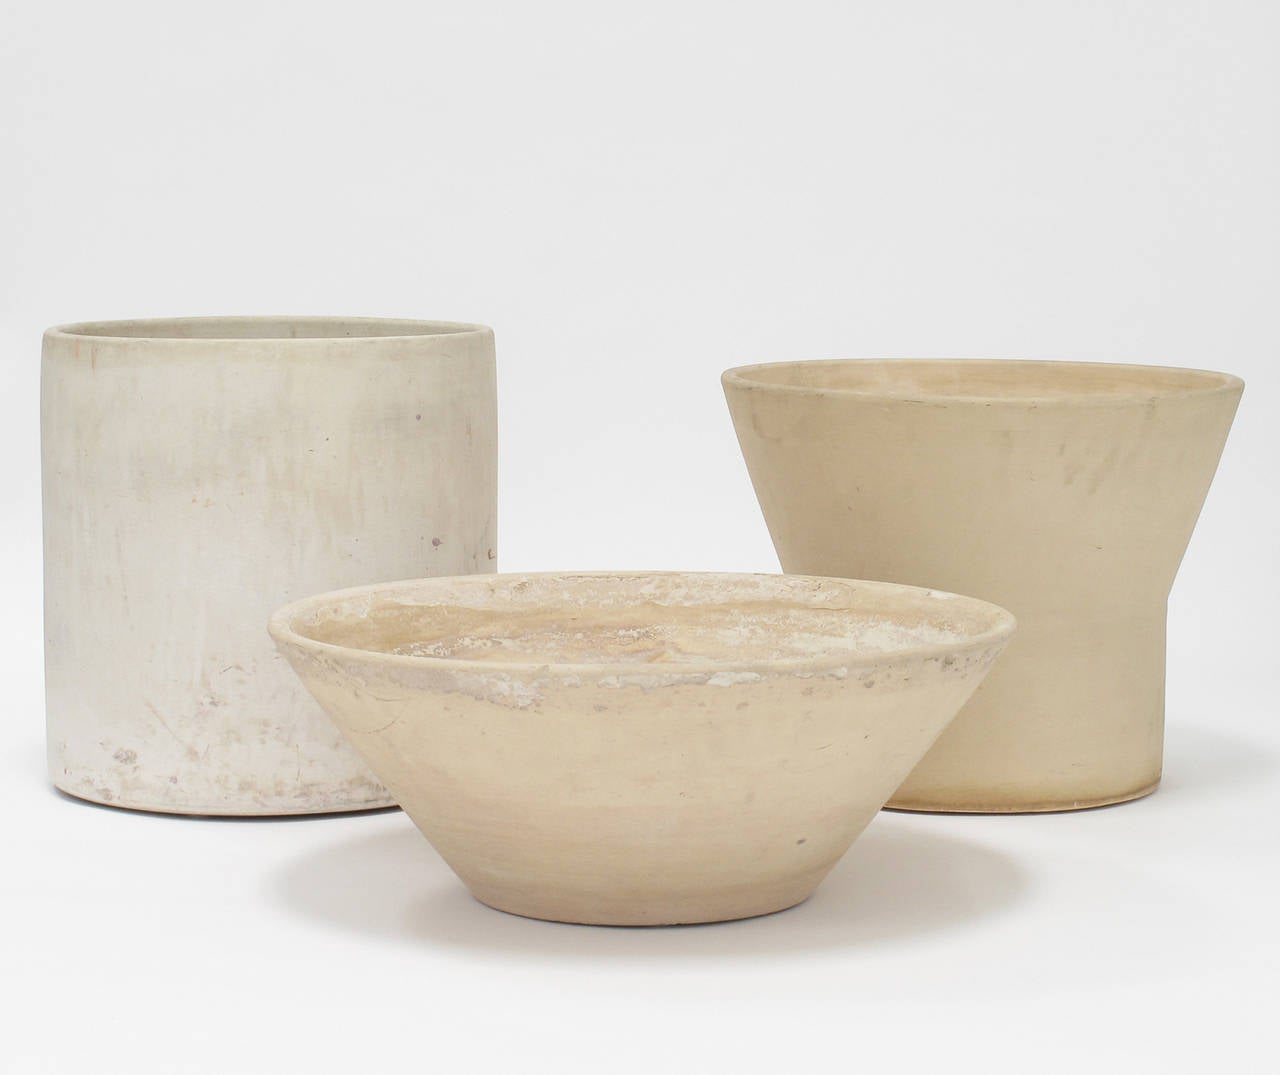 Collection of vintage AP including three bisque planters designed by Paul McCobb, John Follis and LaGardo Tackett, Architectural Pottery, Los Angeles, California, 1950s, all displaying a California modern, indoor-outdoor patina.

Dimensions